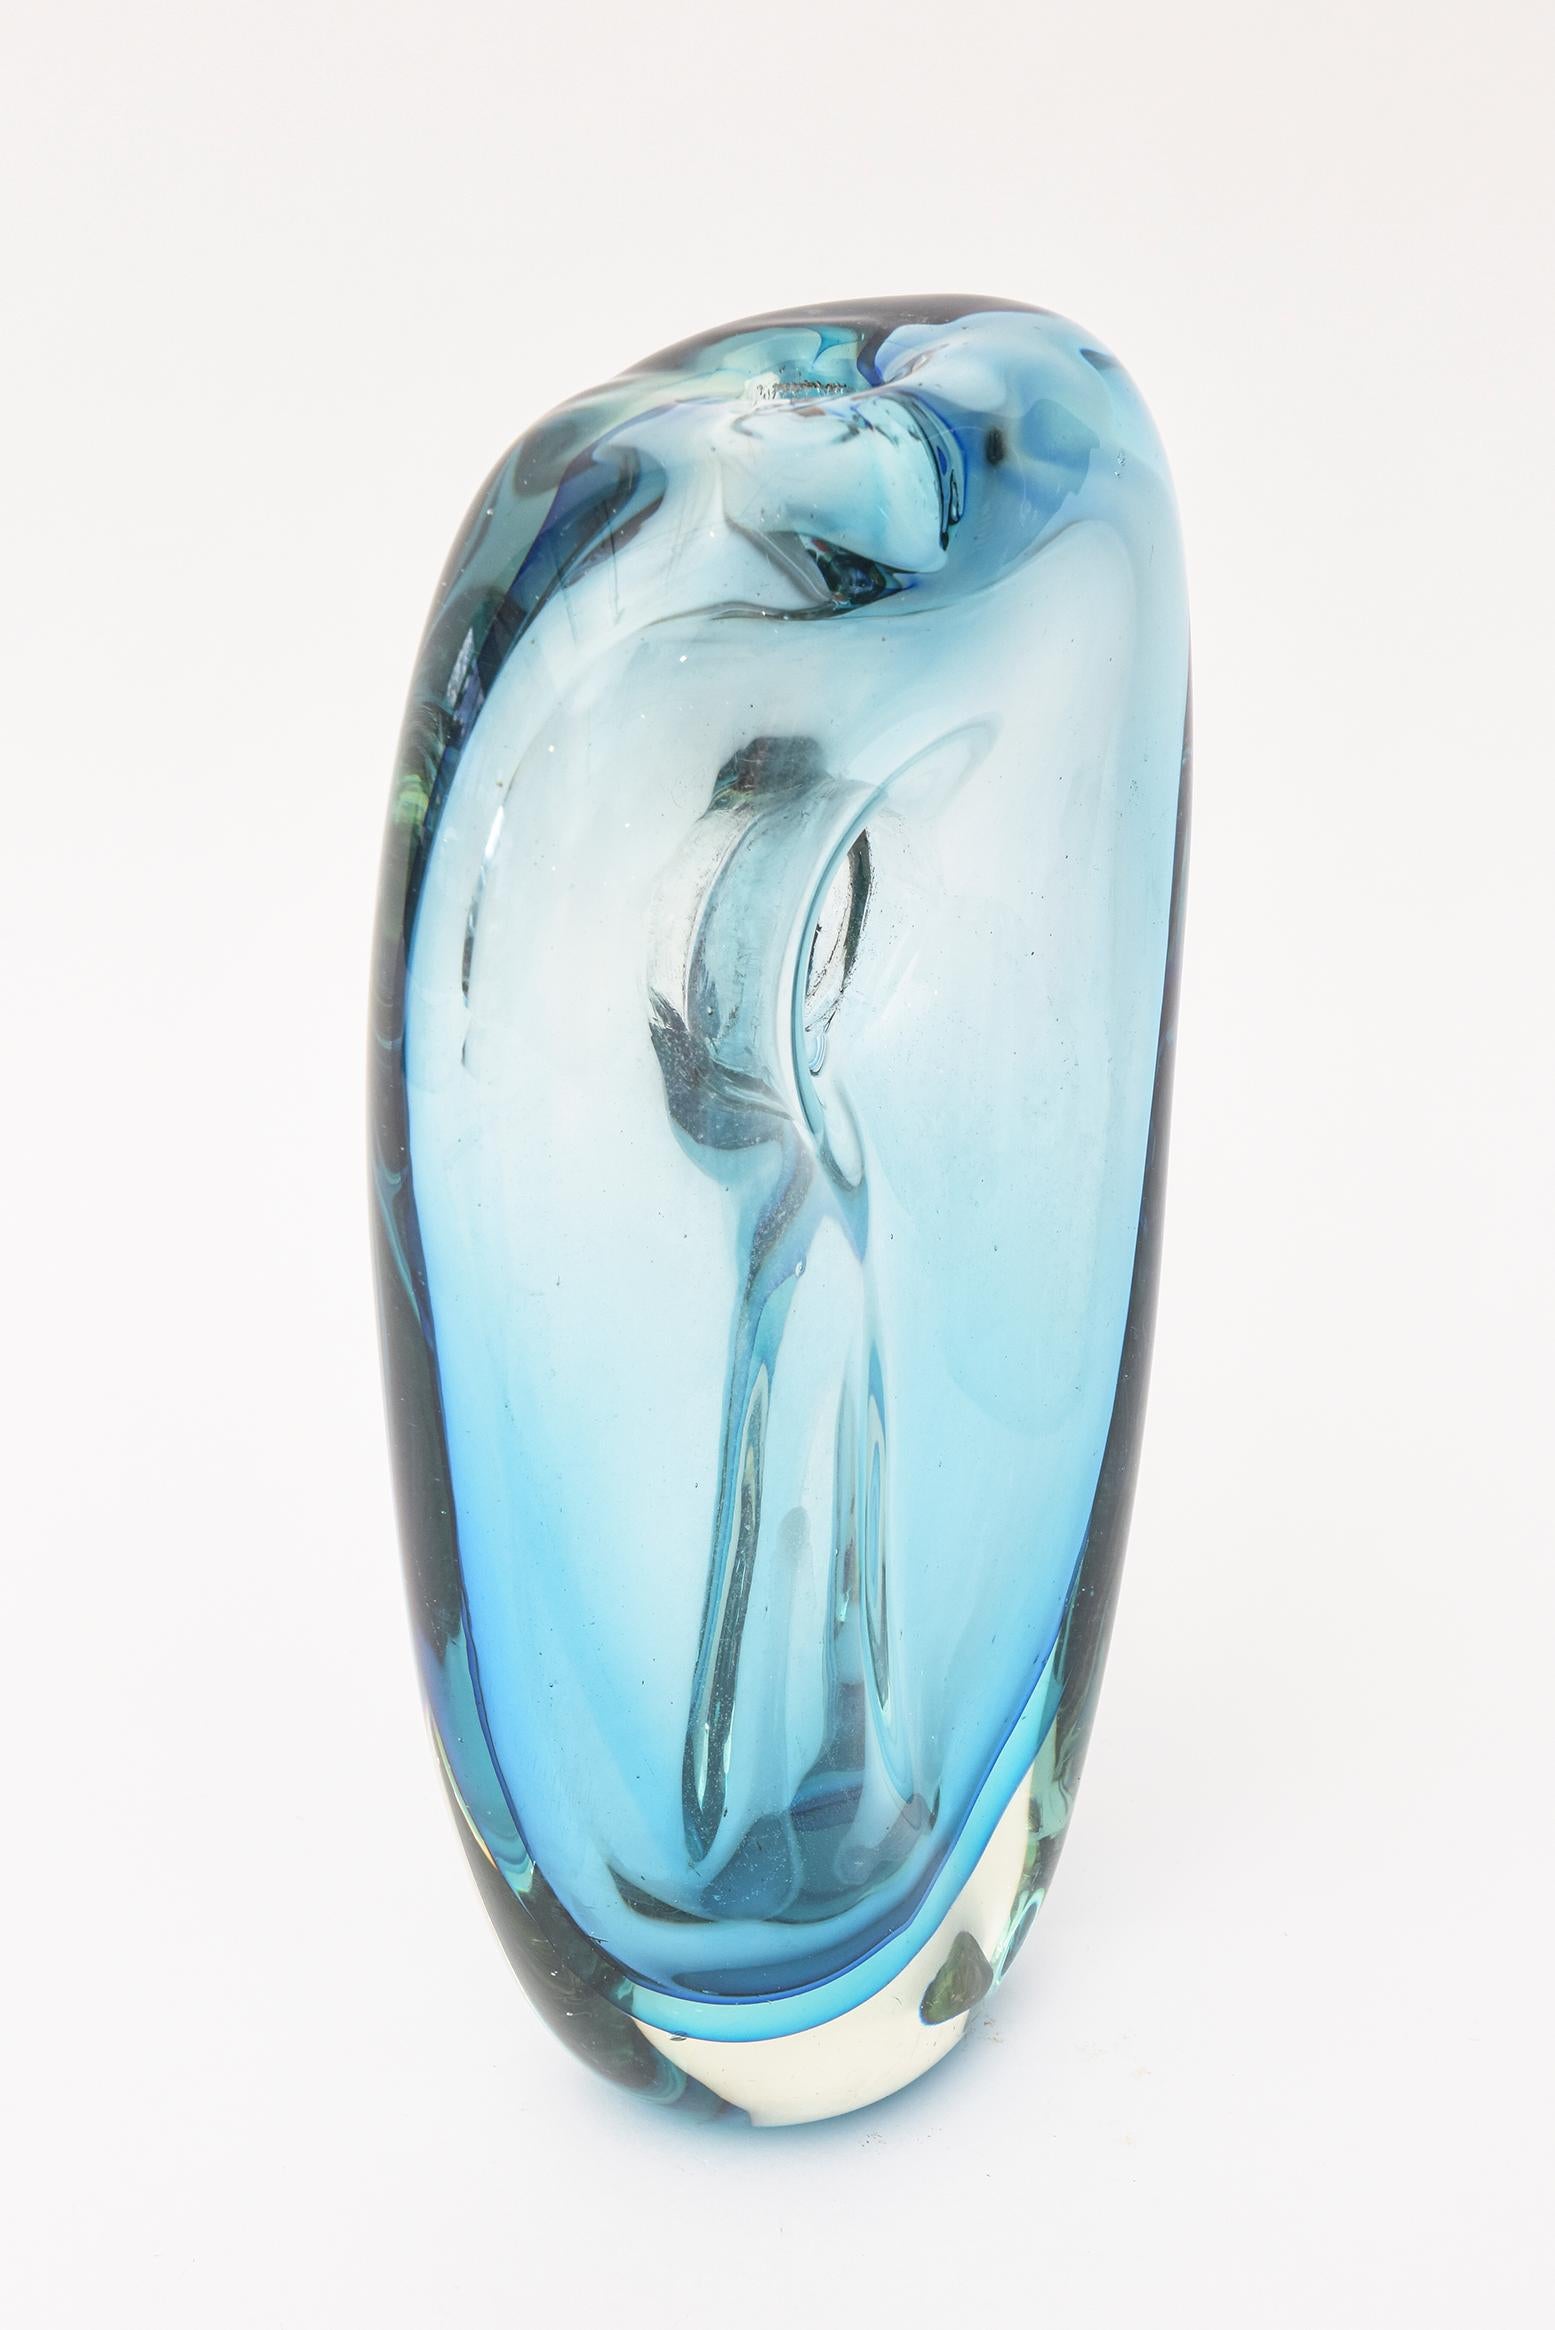 Blown Glass Cenedese Murano Blue Sommerso Vase or Glass Sculpture Vintage